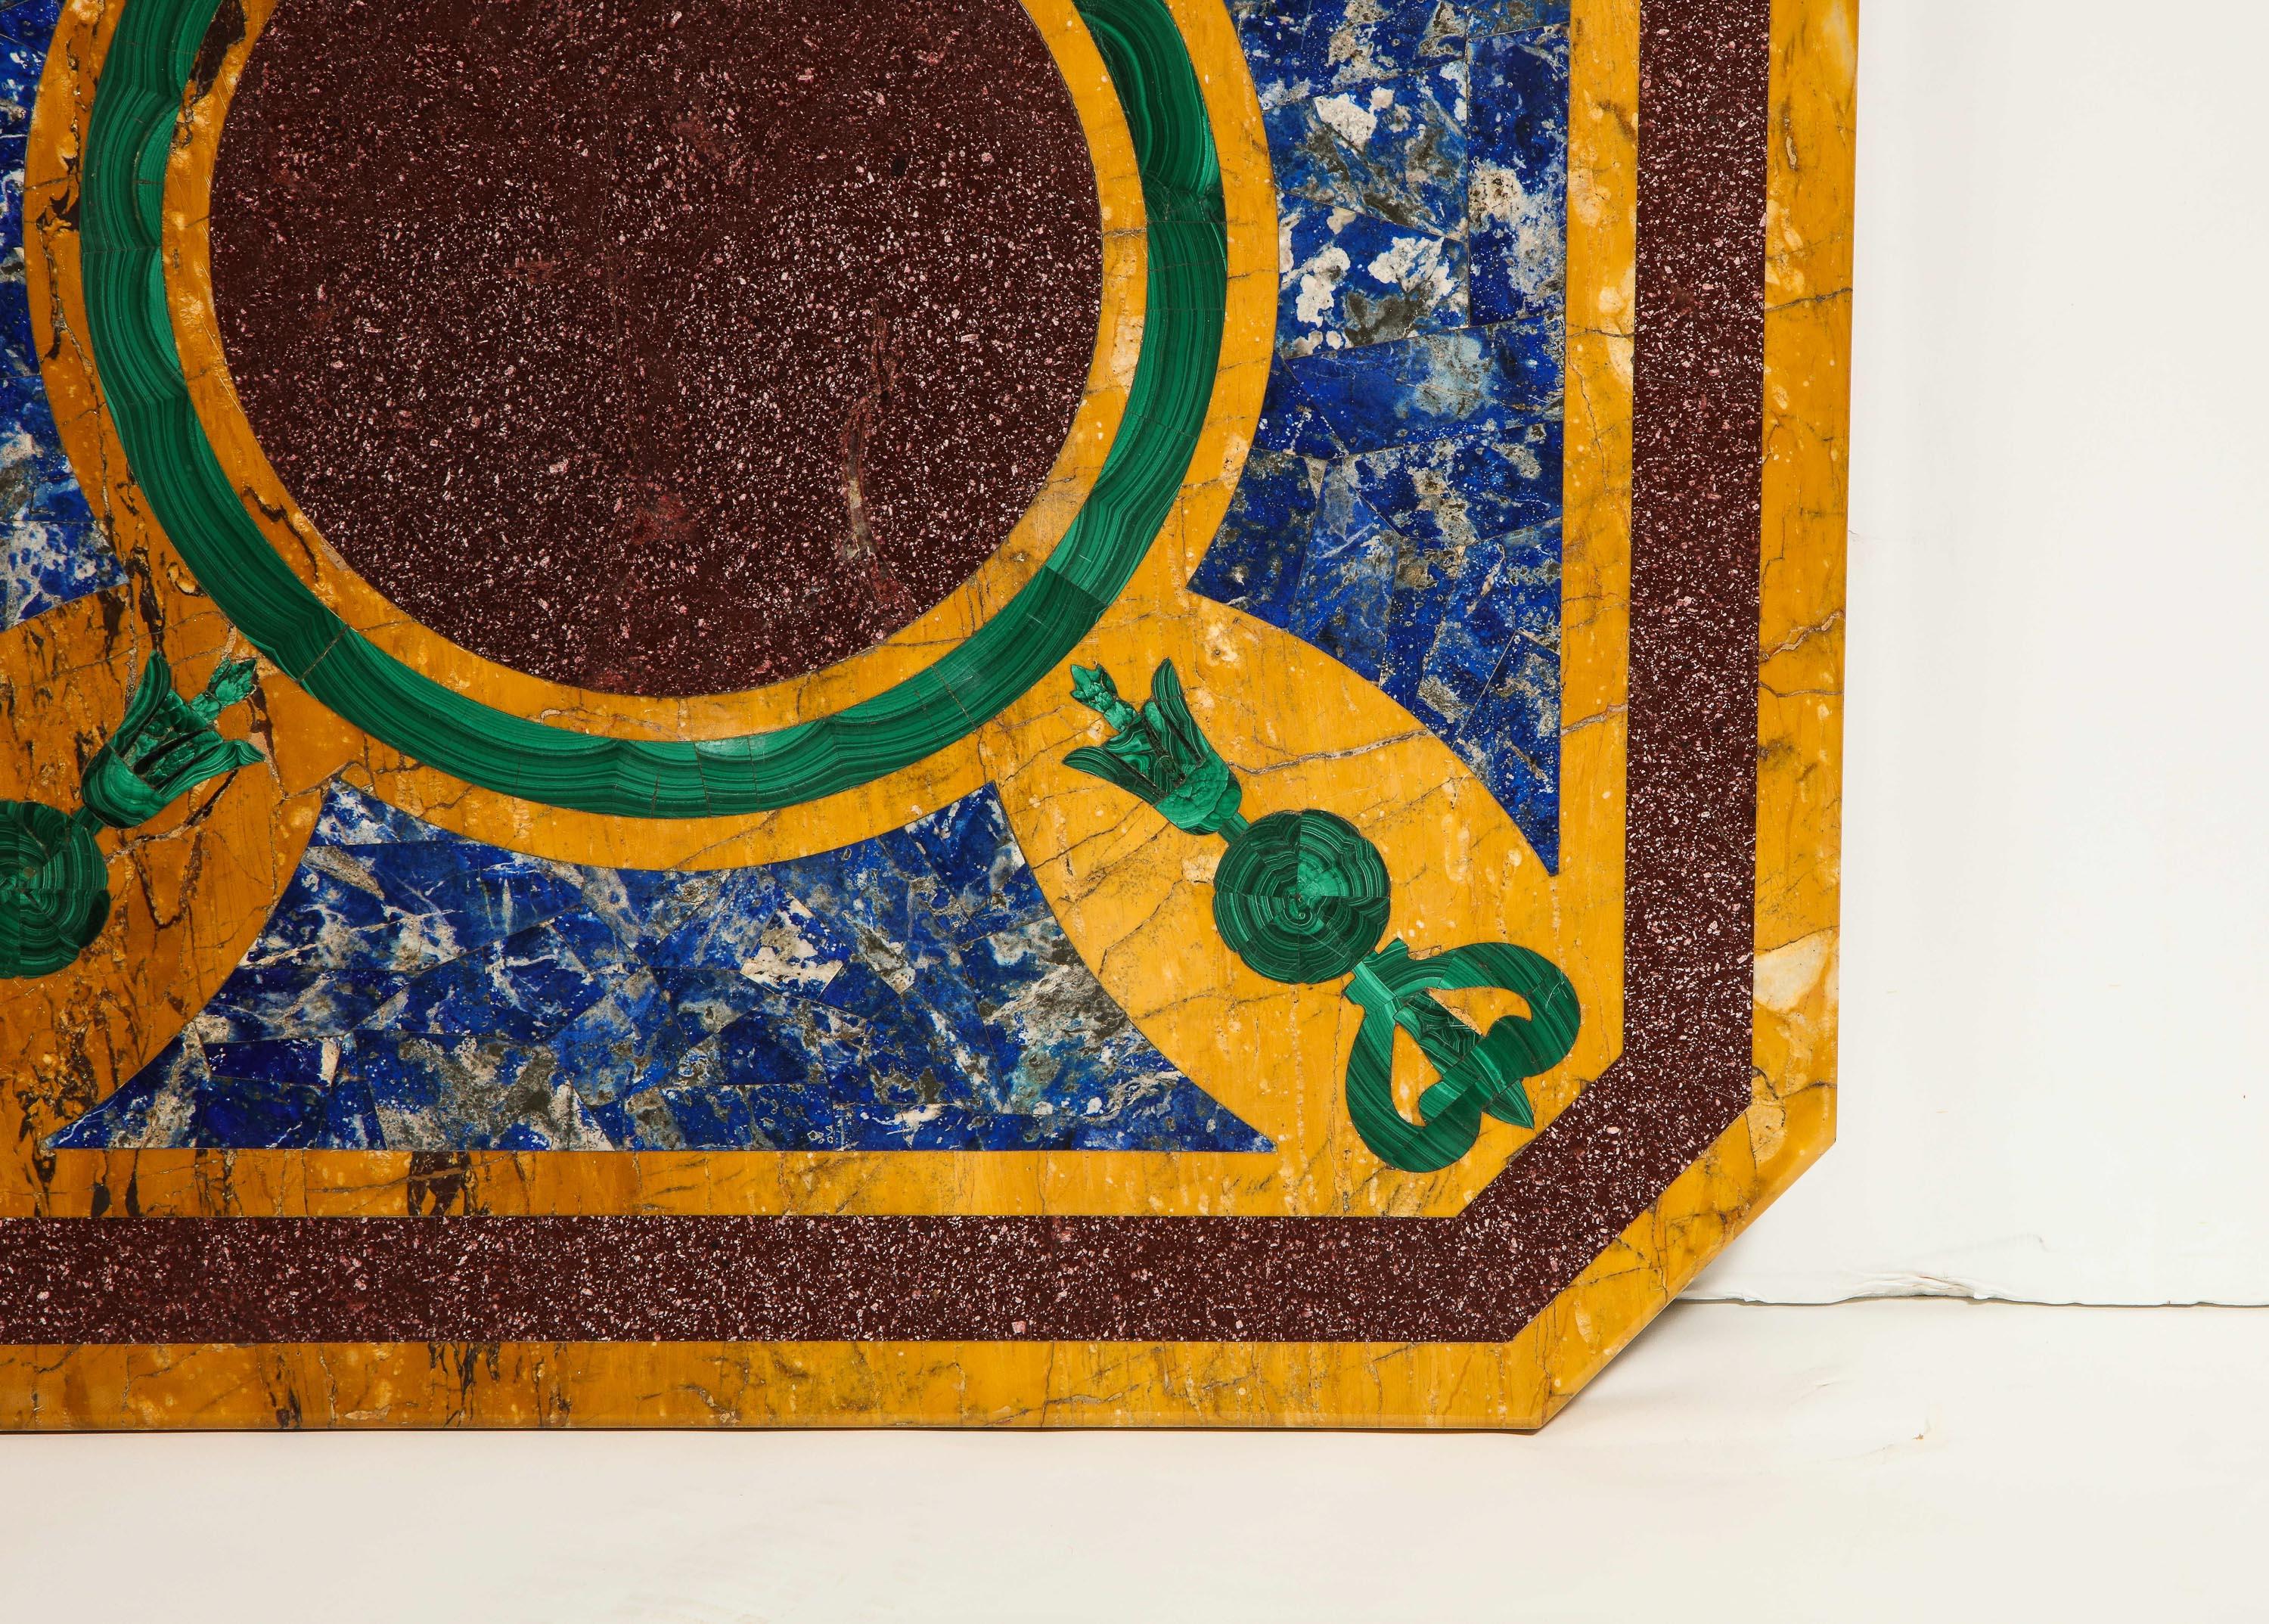 Italian Neoclassical Style Marble, Malachite, Lapis Lazuli, and Porphyry Panel For Sale 1